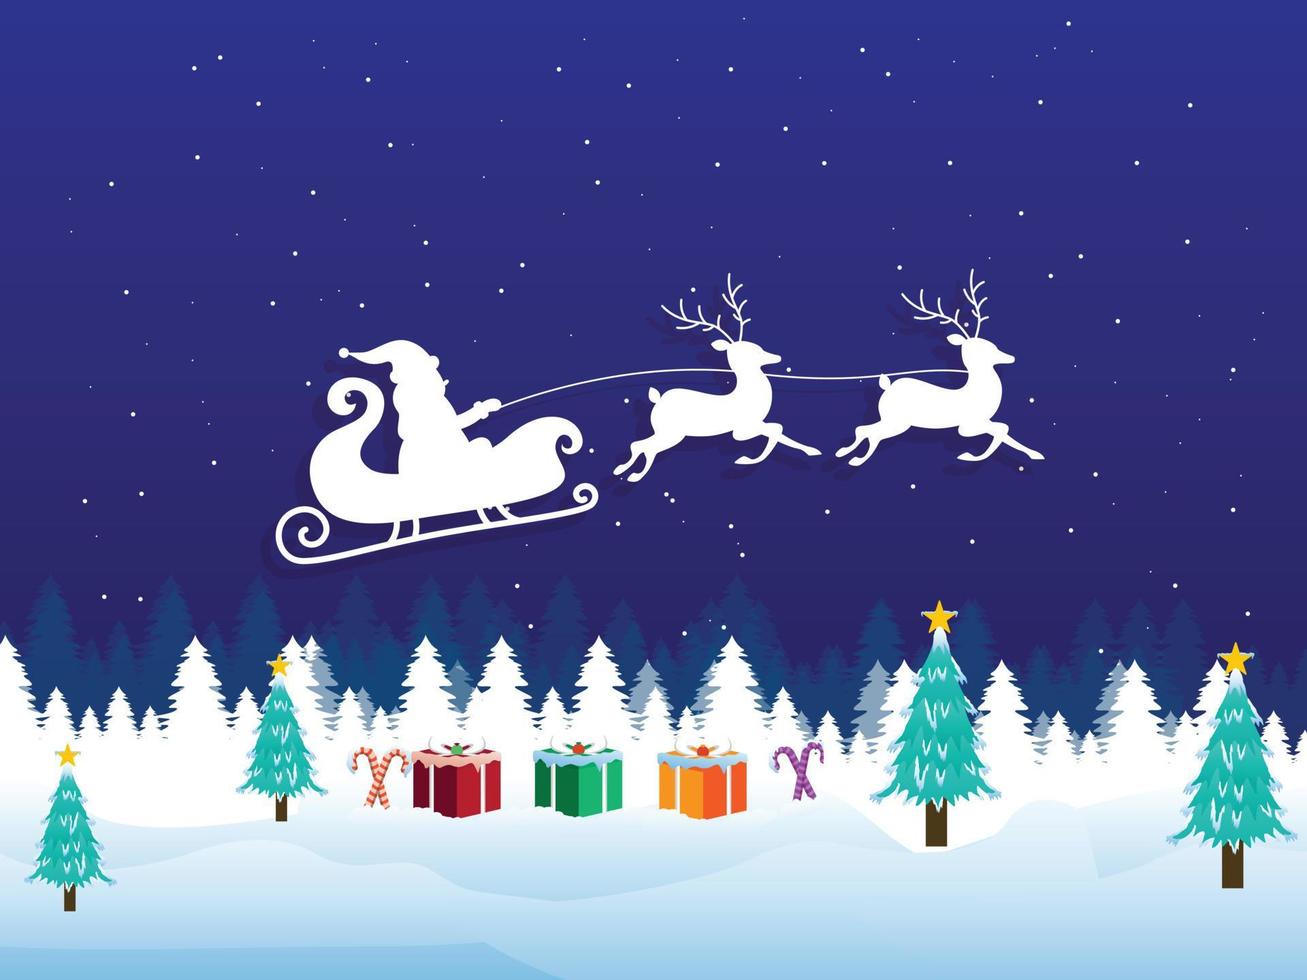 Merry Christmas Background With Santa Gifts vector